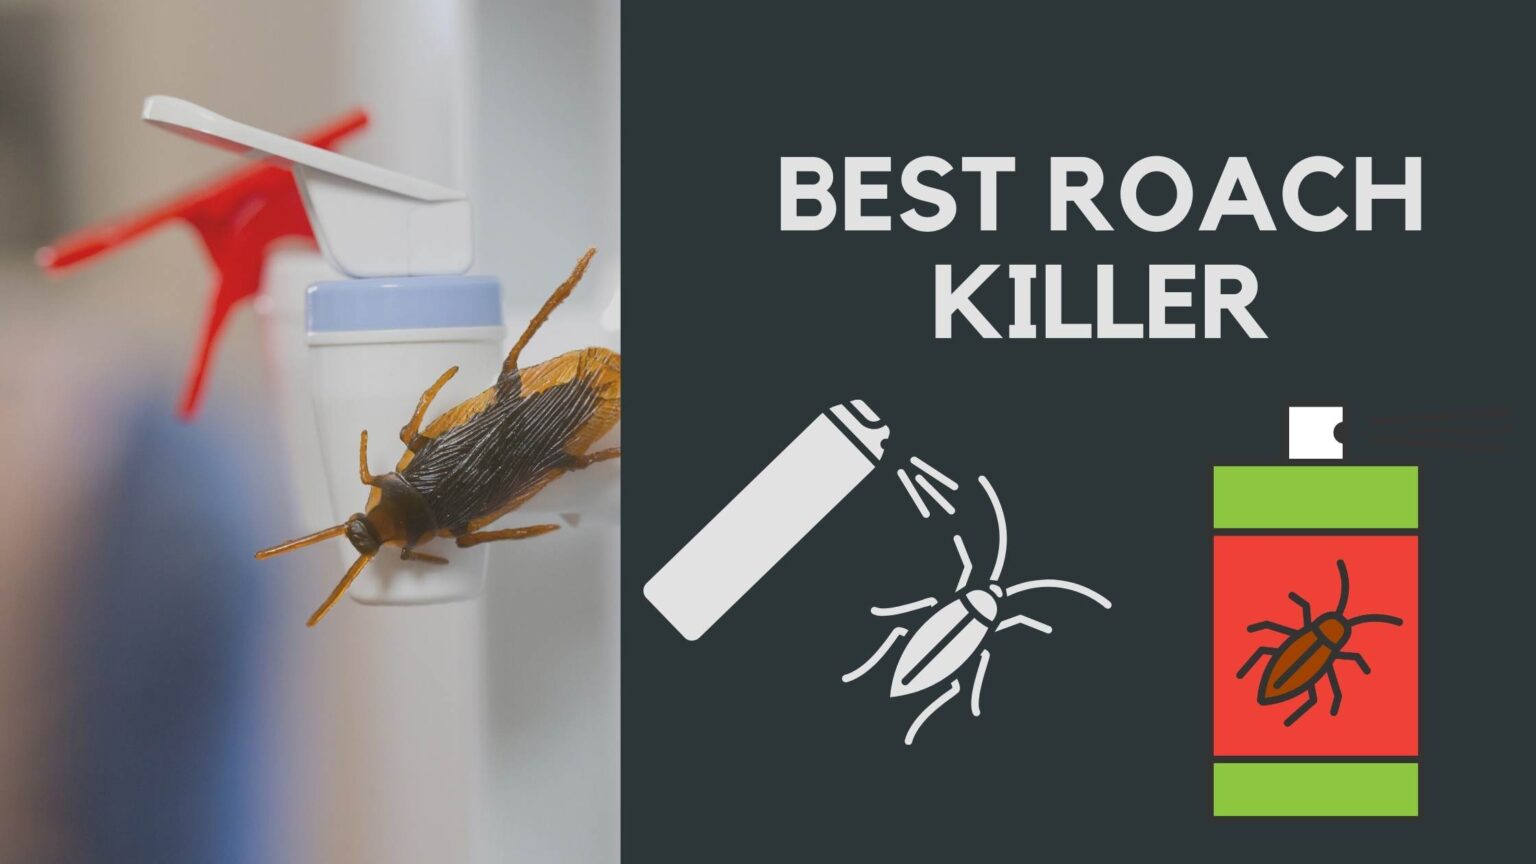 Best roach killer - greatfriction.com - How To Get Rid Of A Heavy Roach Infestation